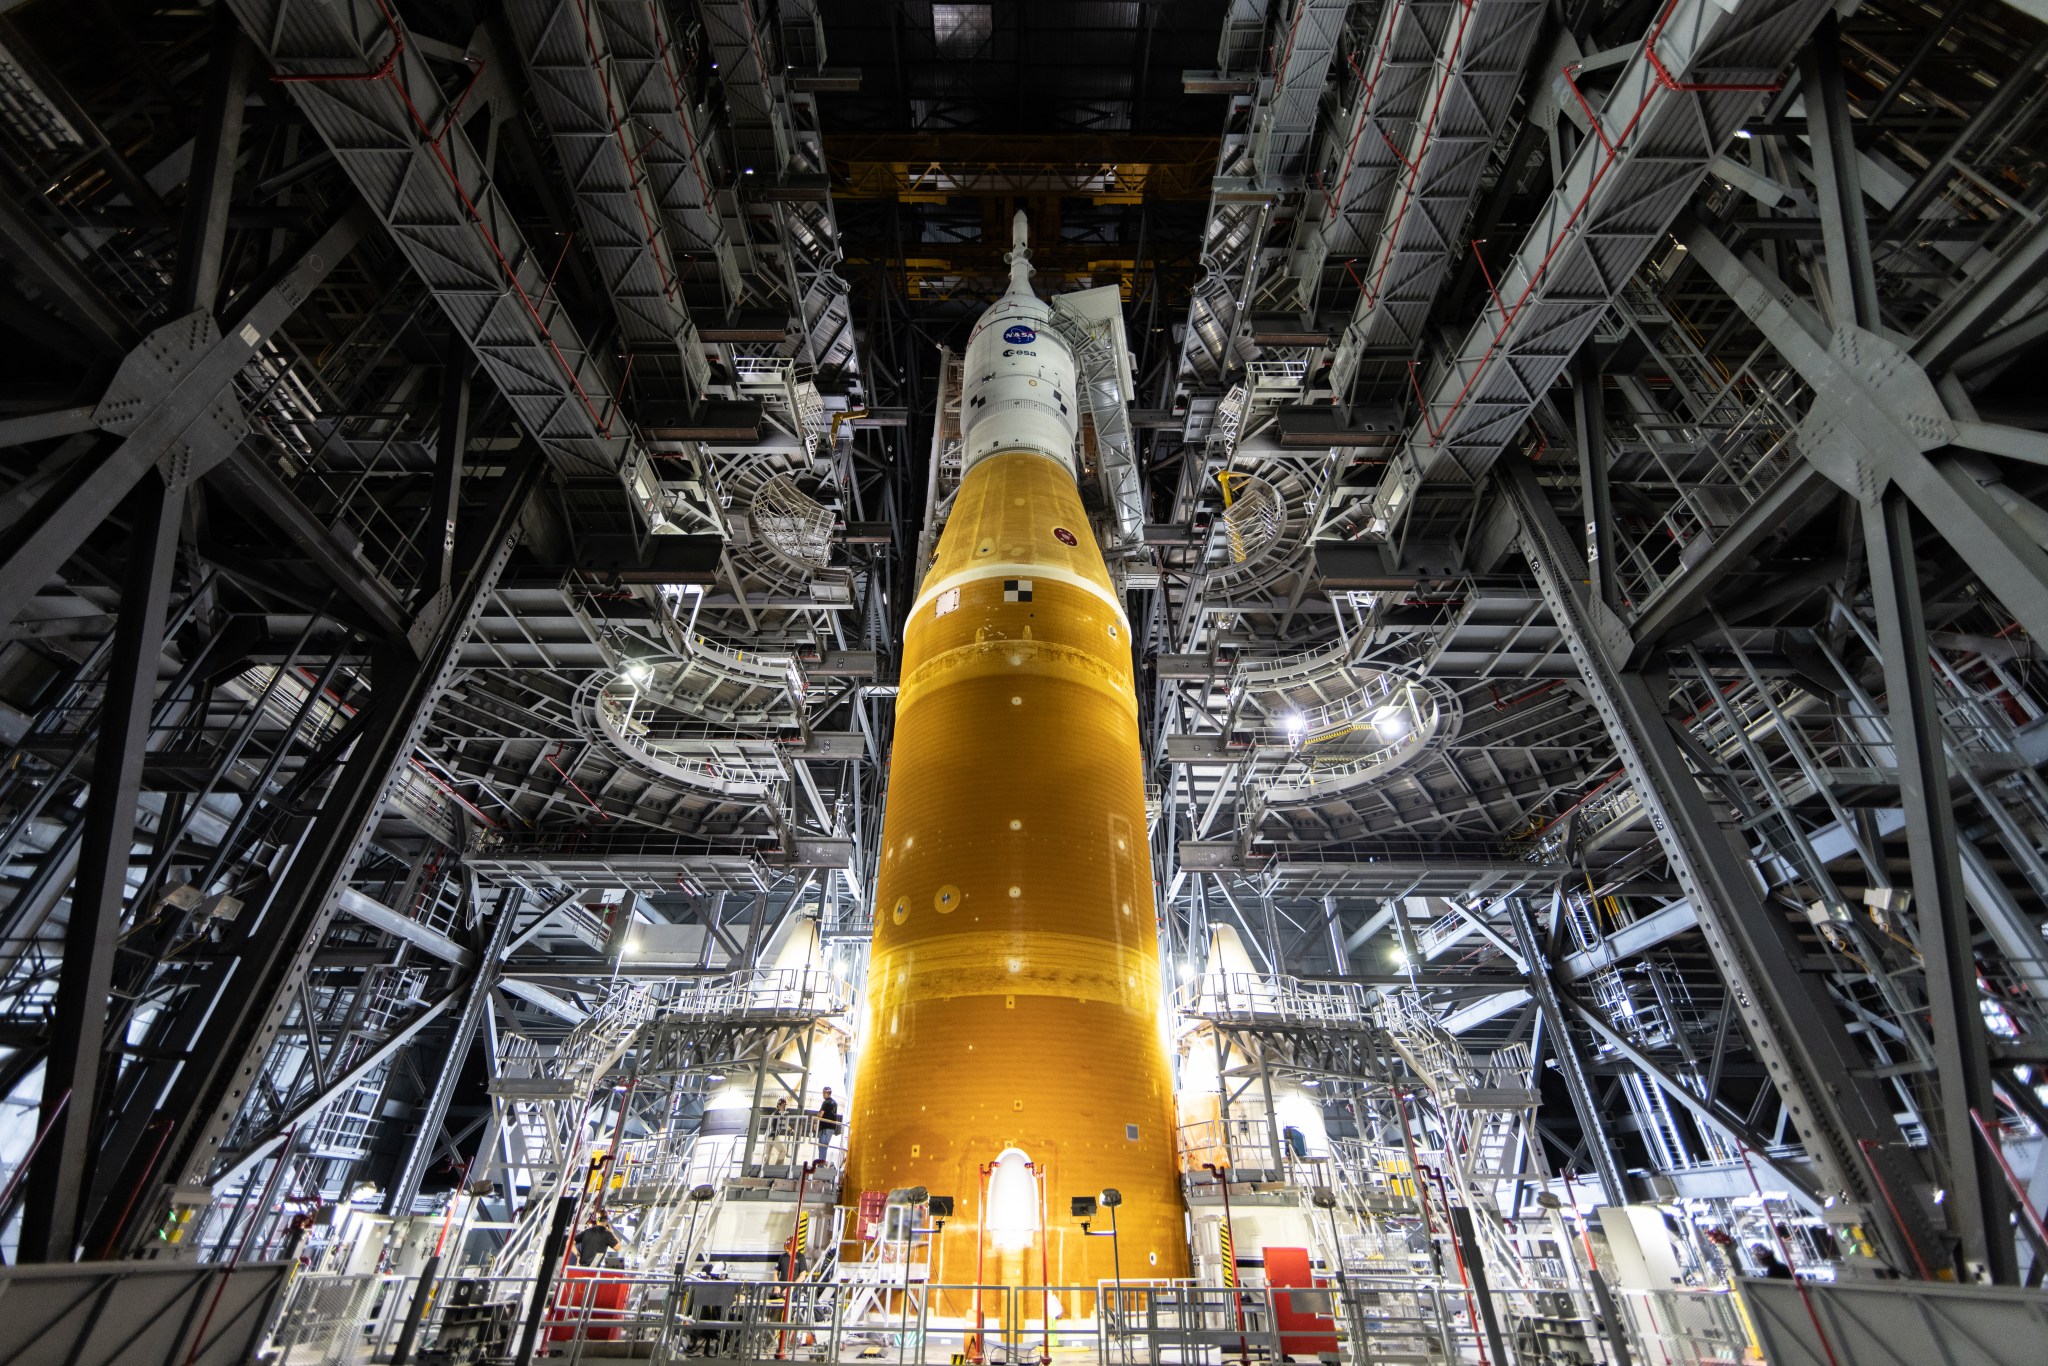 NASA's Space Launch System rocket is seen in the Vehicle Assembly Building at NASA's Kennedy Space Center in this view looking from the bottom of the rocket up to the top.